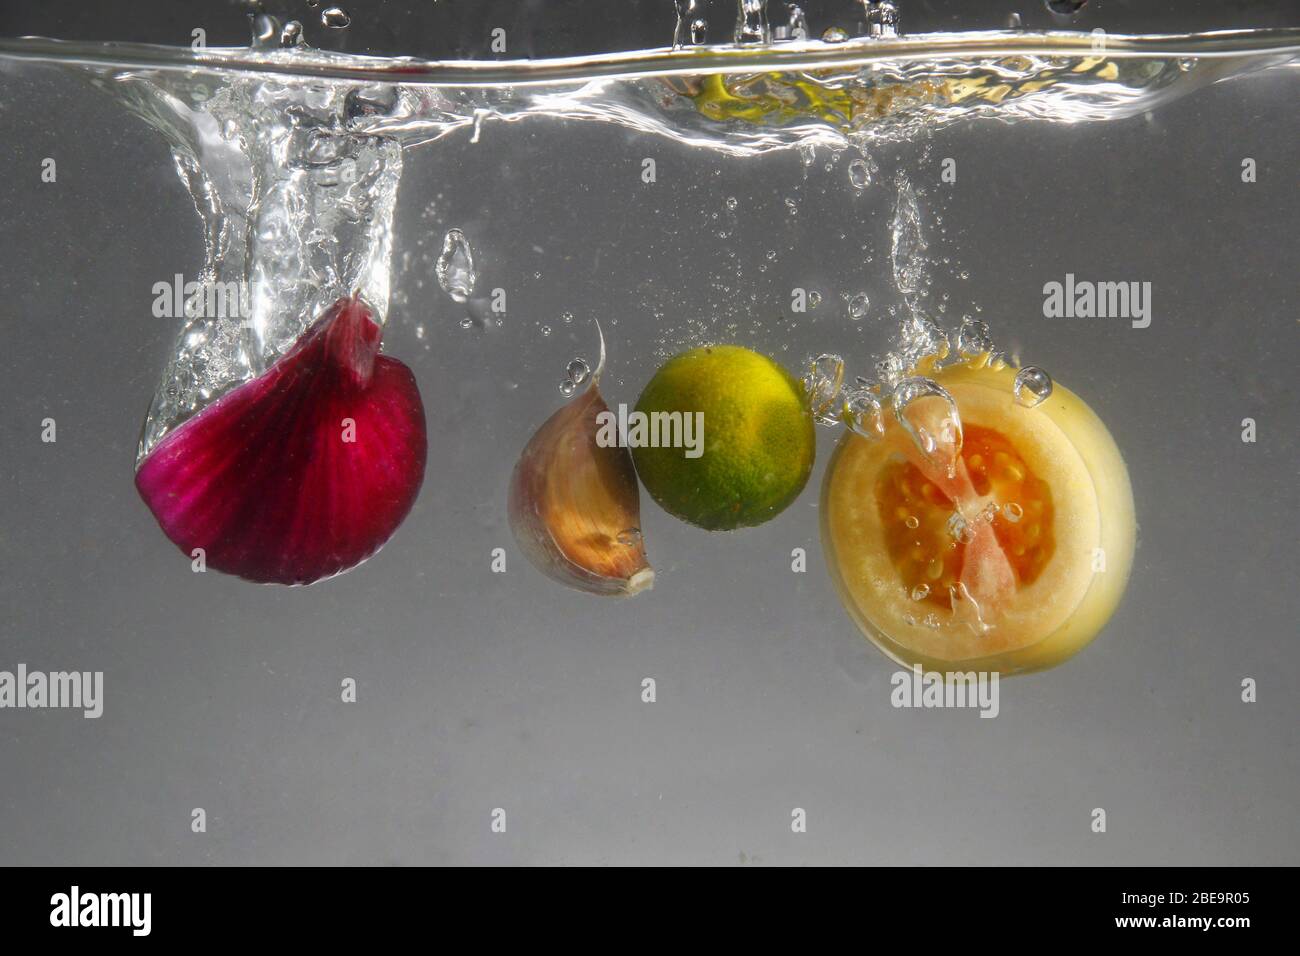 Photo of red onion, garlic, tomato and calamansi dropped in water Stock Photo